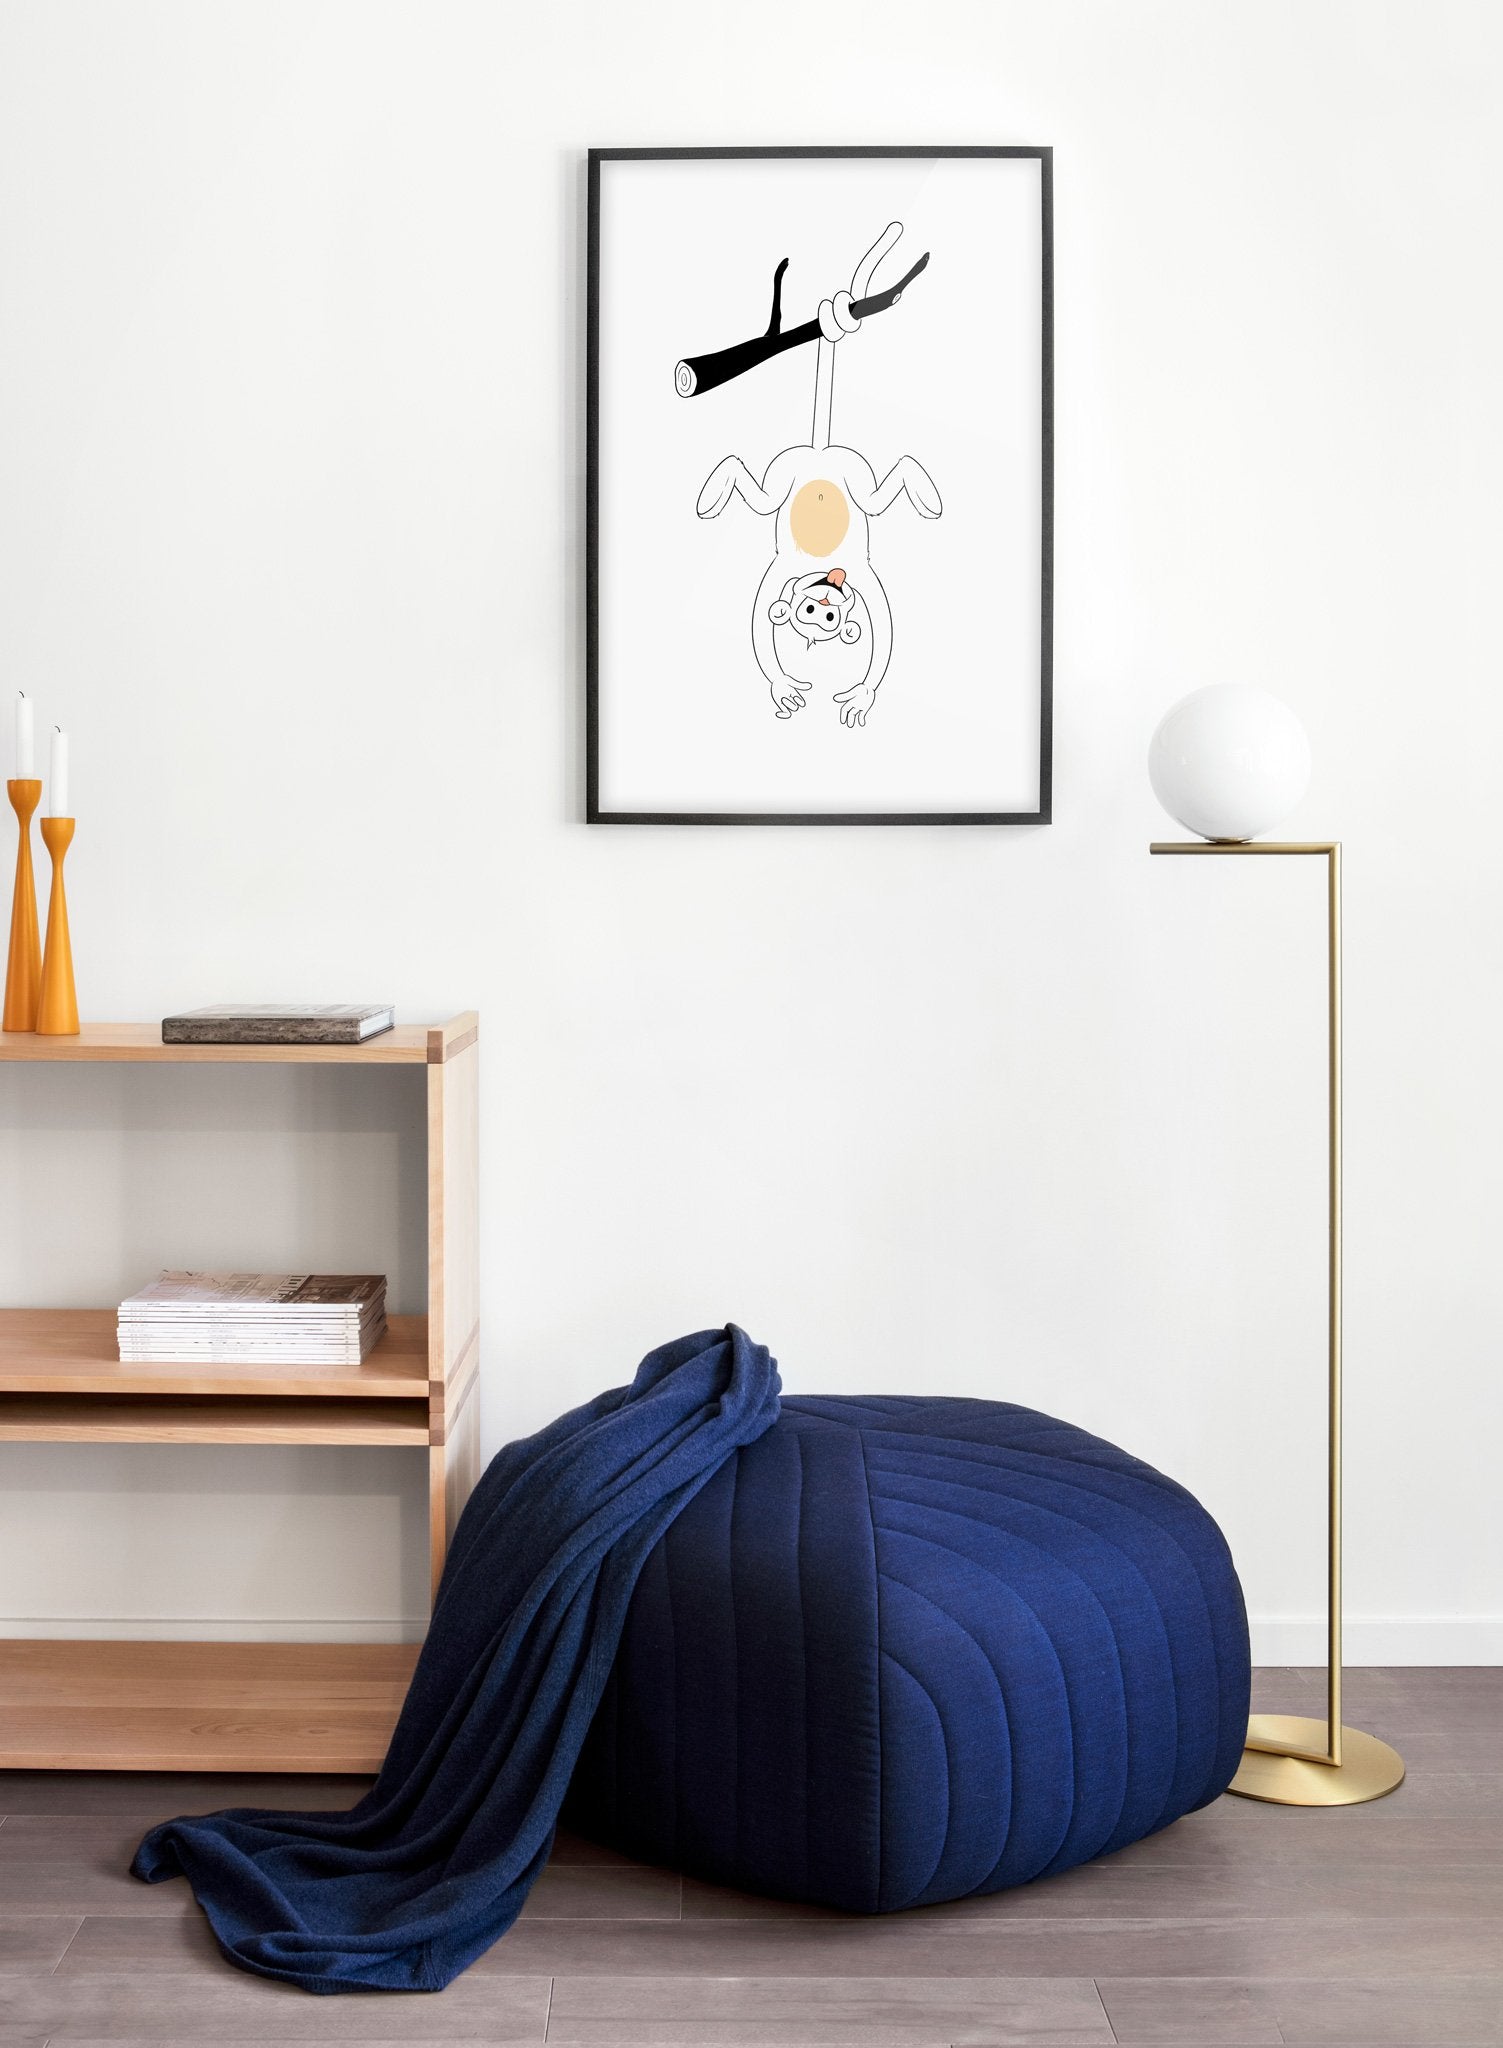 Modern minimalist poster by Opposite Wall with an illustration of a monkey - kids collection